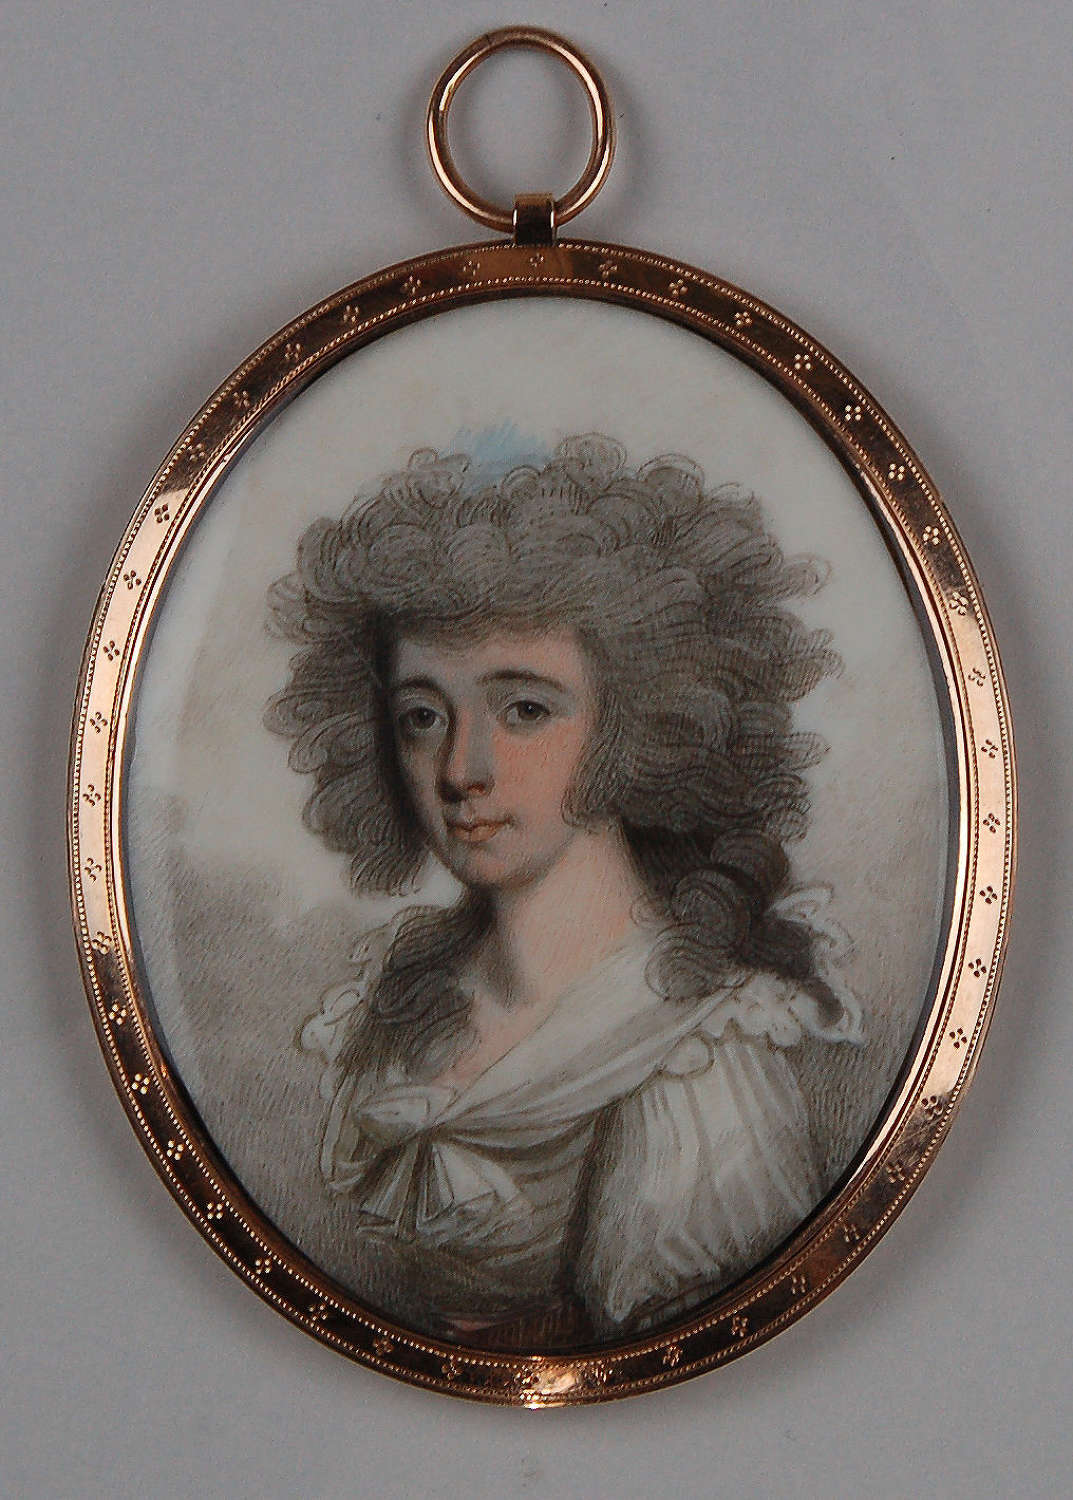 Miniature of lady by J Barry C1795